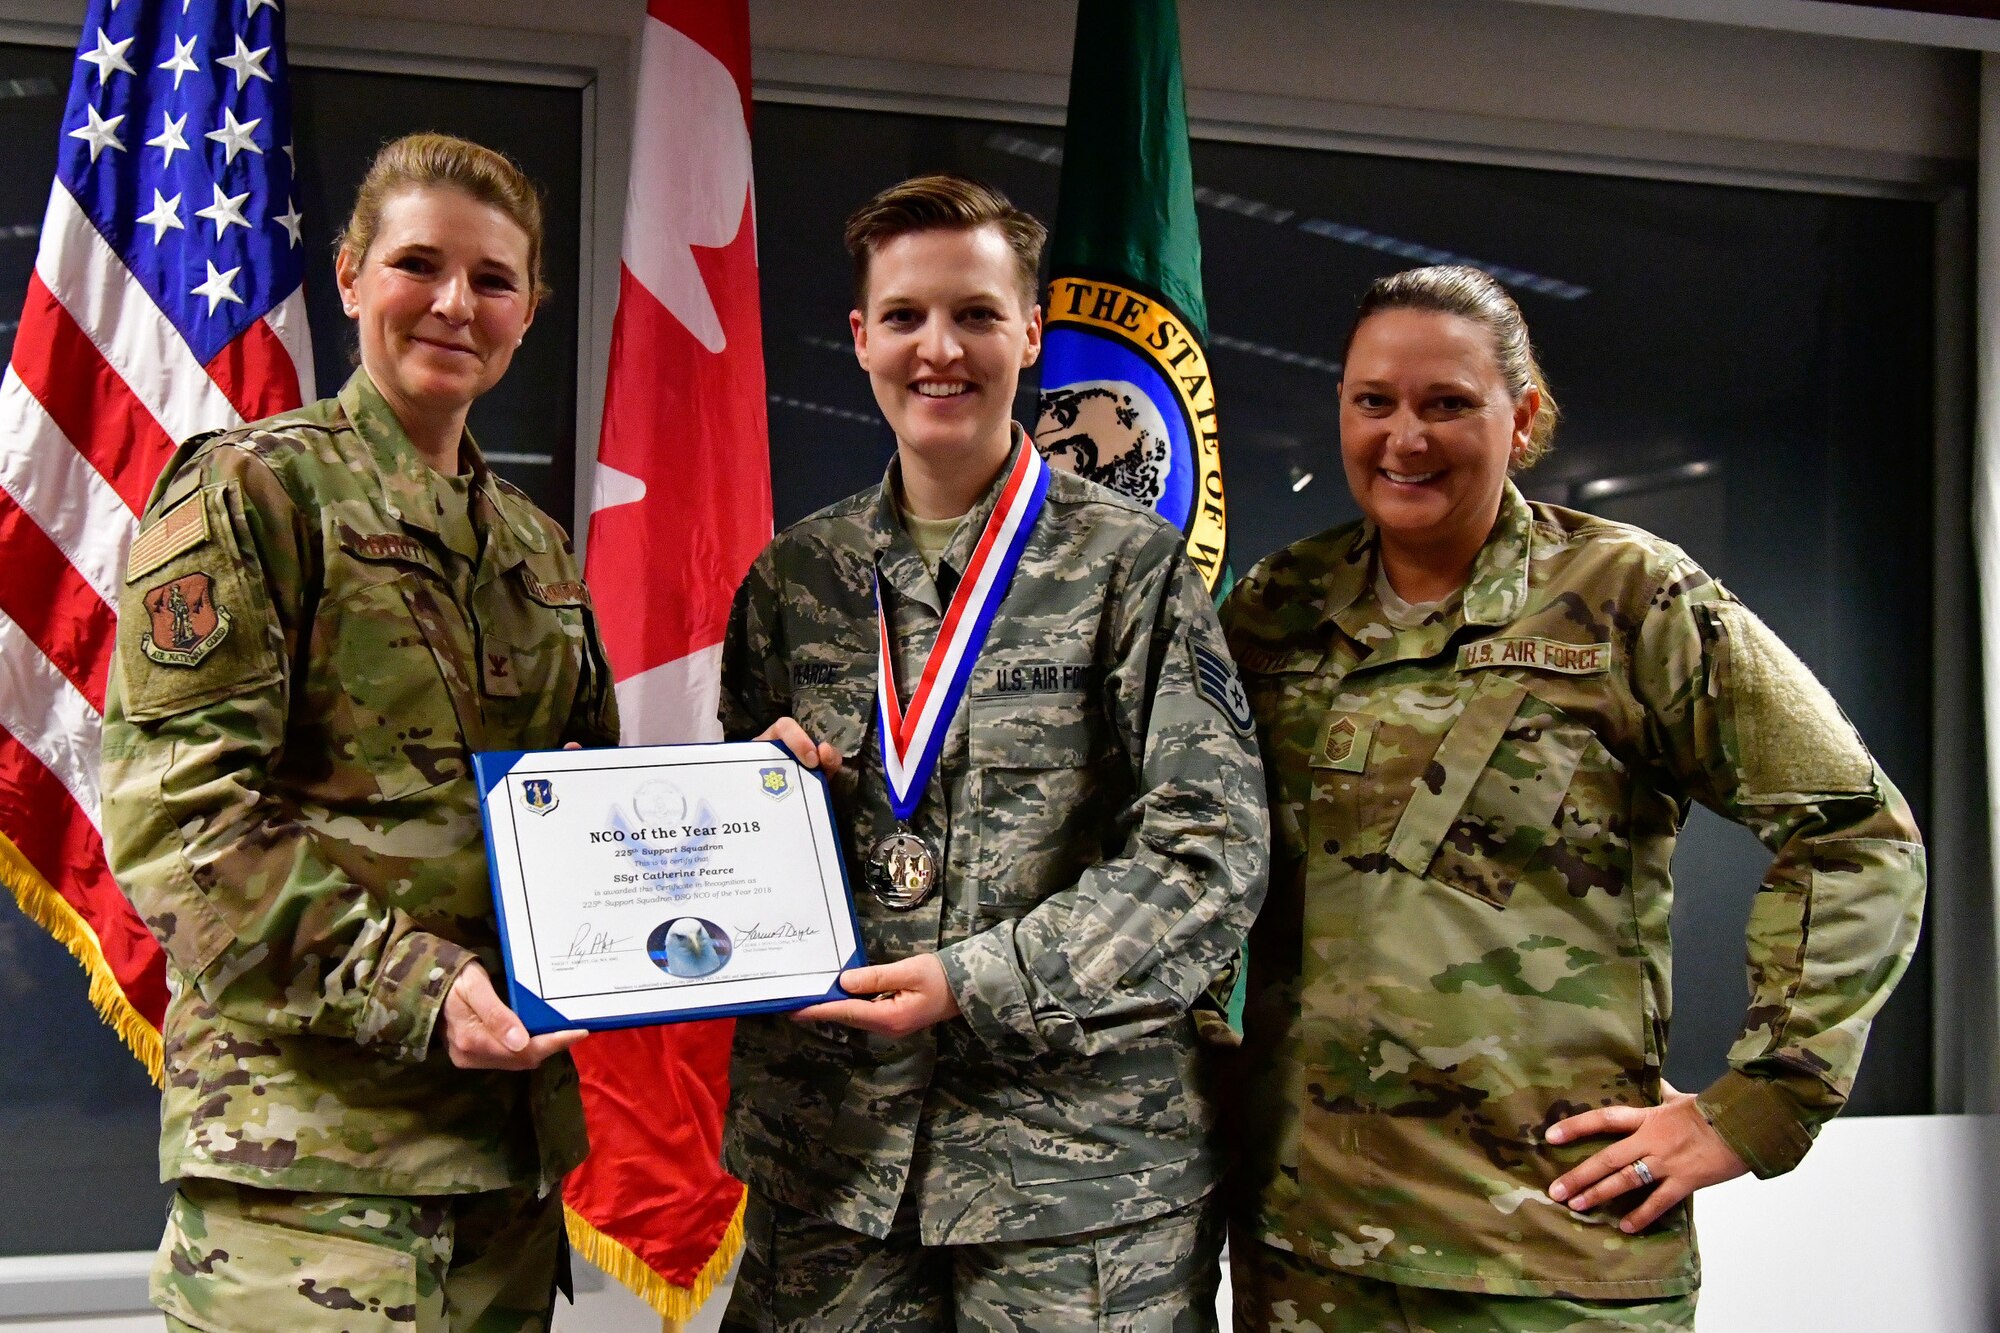 Staff Sgt. Catherine Pearce, 225th Support Squadron emergency management specialist is named the 225th Support Squadron Category I Drill Status Guardsmen of the Year Dec. 1, 2018 on Joint Base Lewis-McChord.  Pearce poses with Col. Paige Abbott (left), 225th SS commander and Chief Master Sgt. Laurie Doyle, 225th SS chief enlisted manager. (U.S. Air National Guard photo by Maj. Kimberly D. Burke)